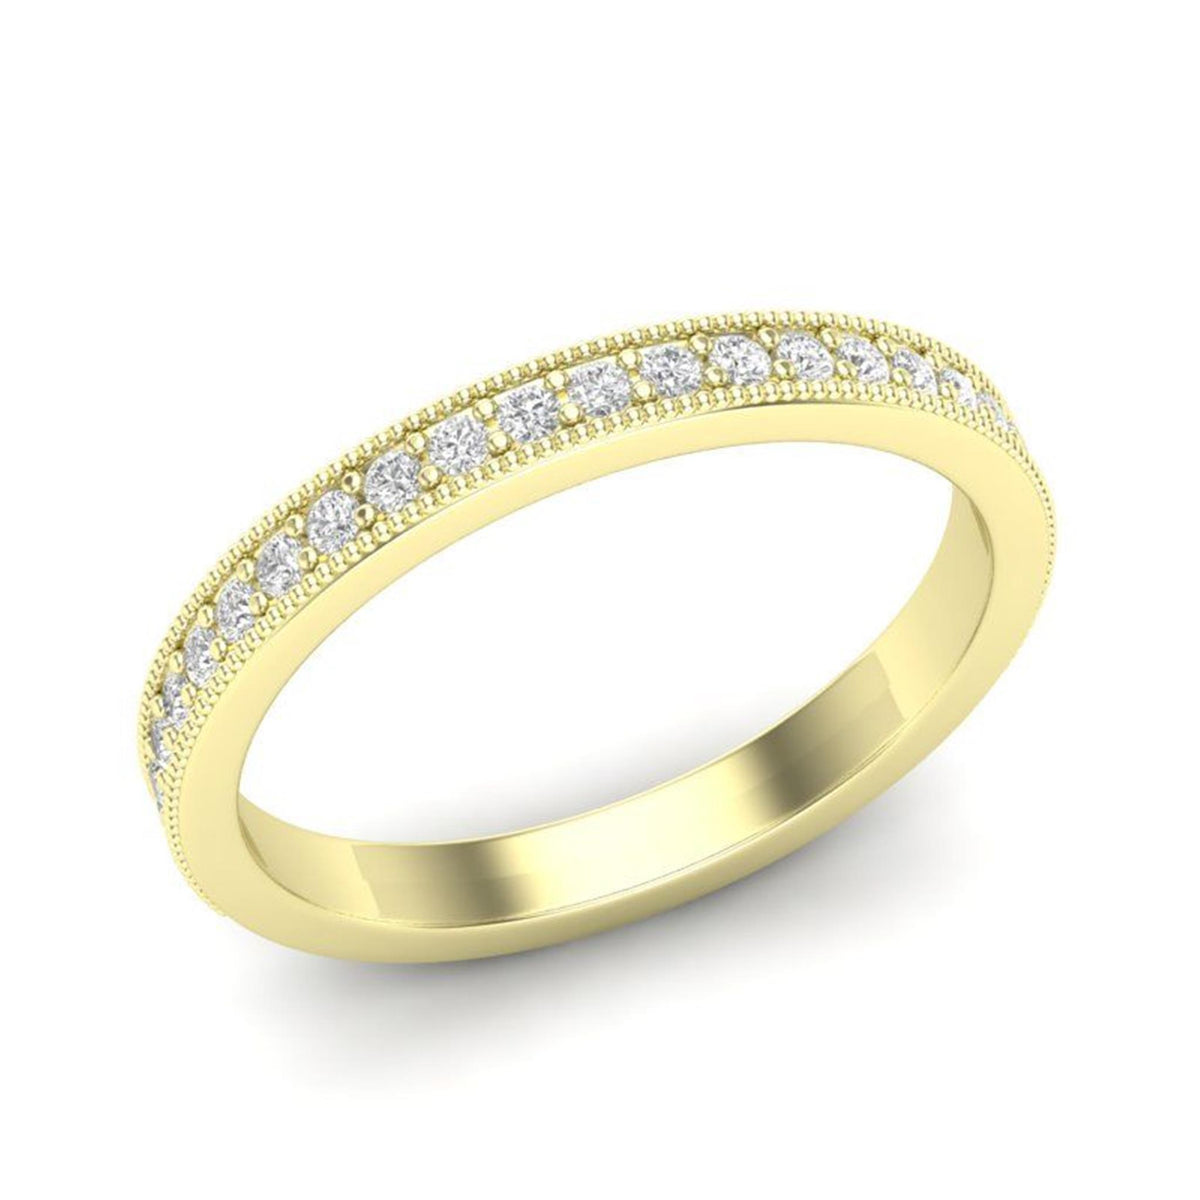 14Kt Yellow Gold Vintage Inspired Ring With .25cttw Natural Diamonds